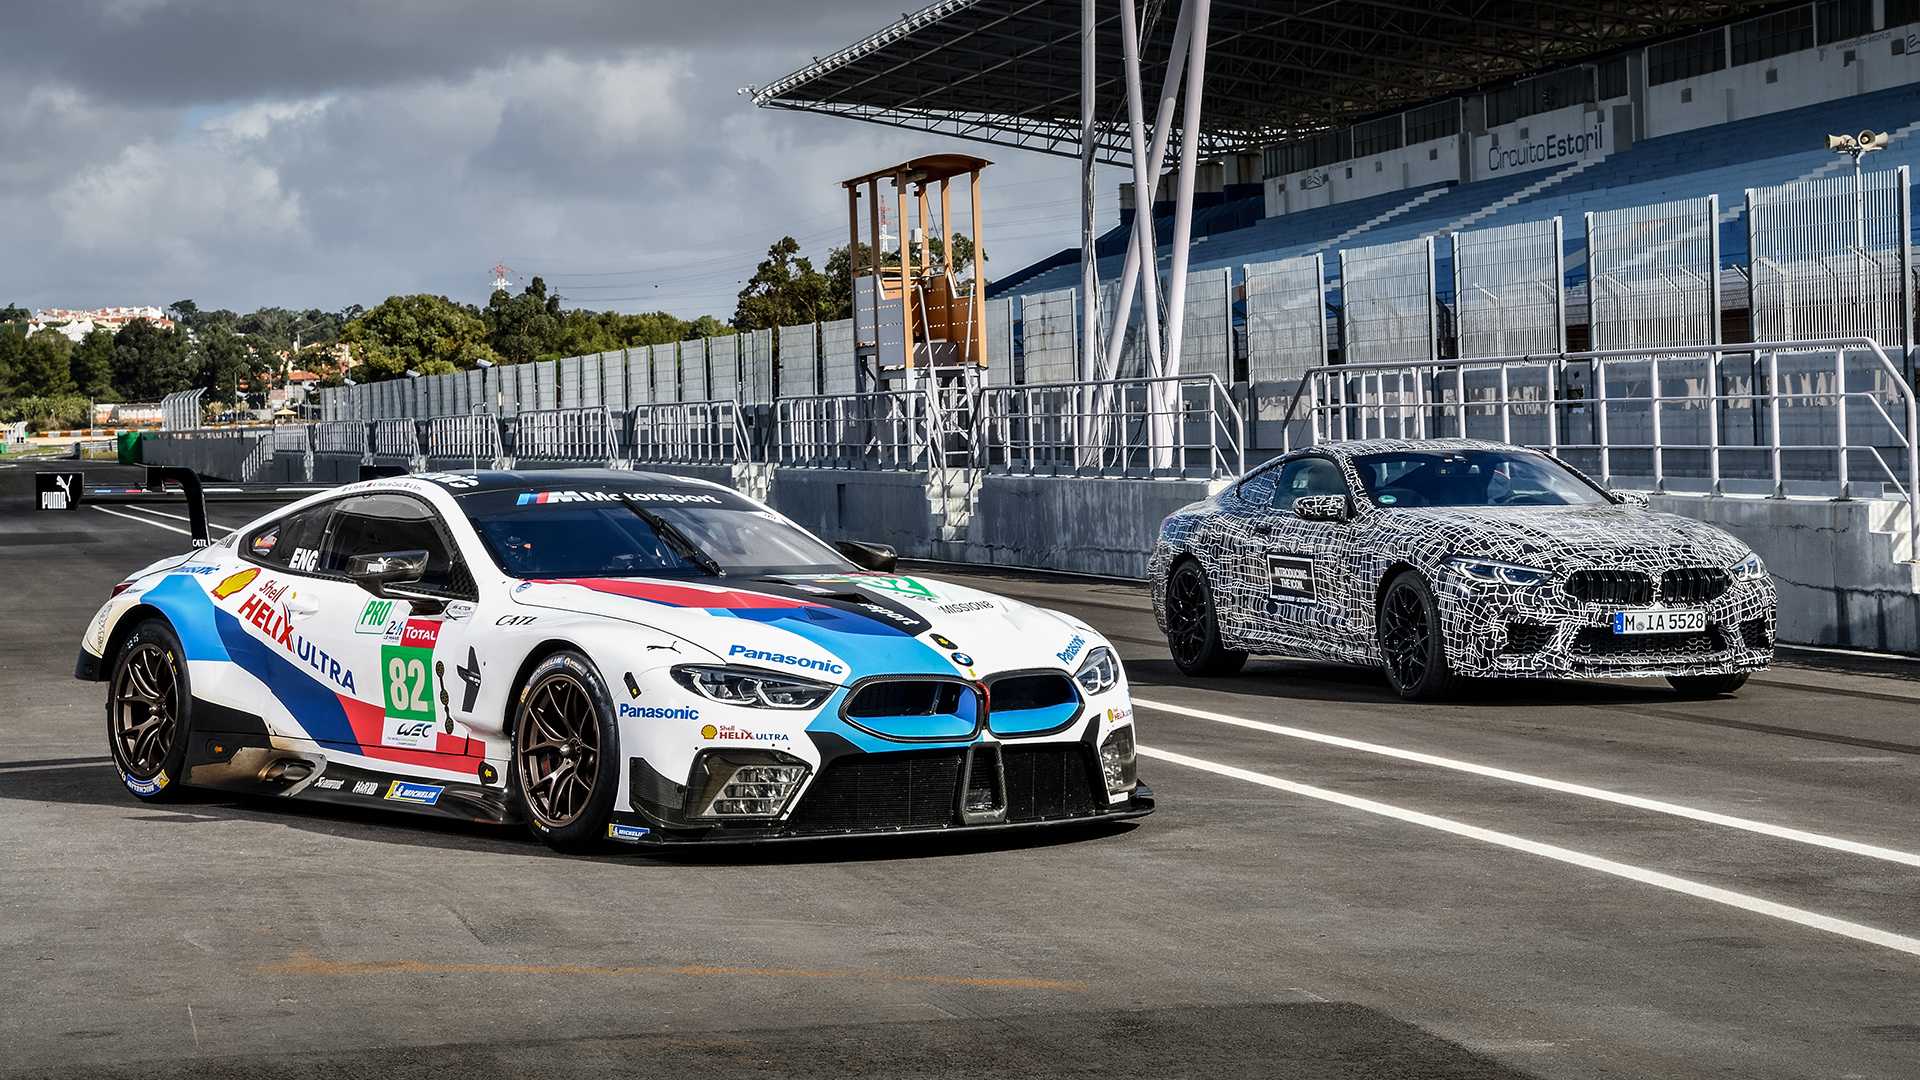 Hop Onboard The BMW M8 and M8 GTE For Hot Laps